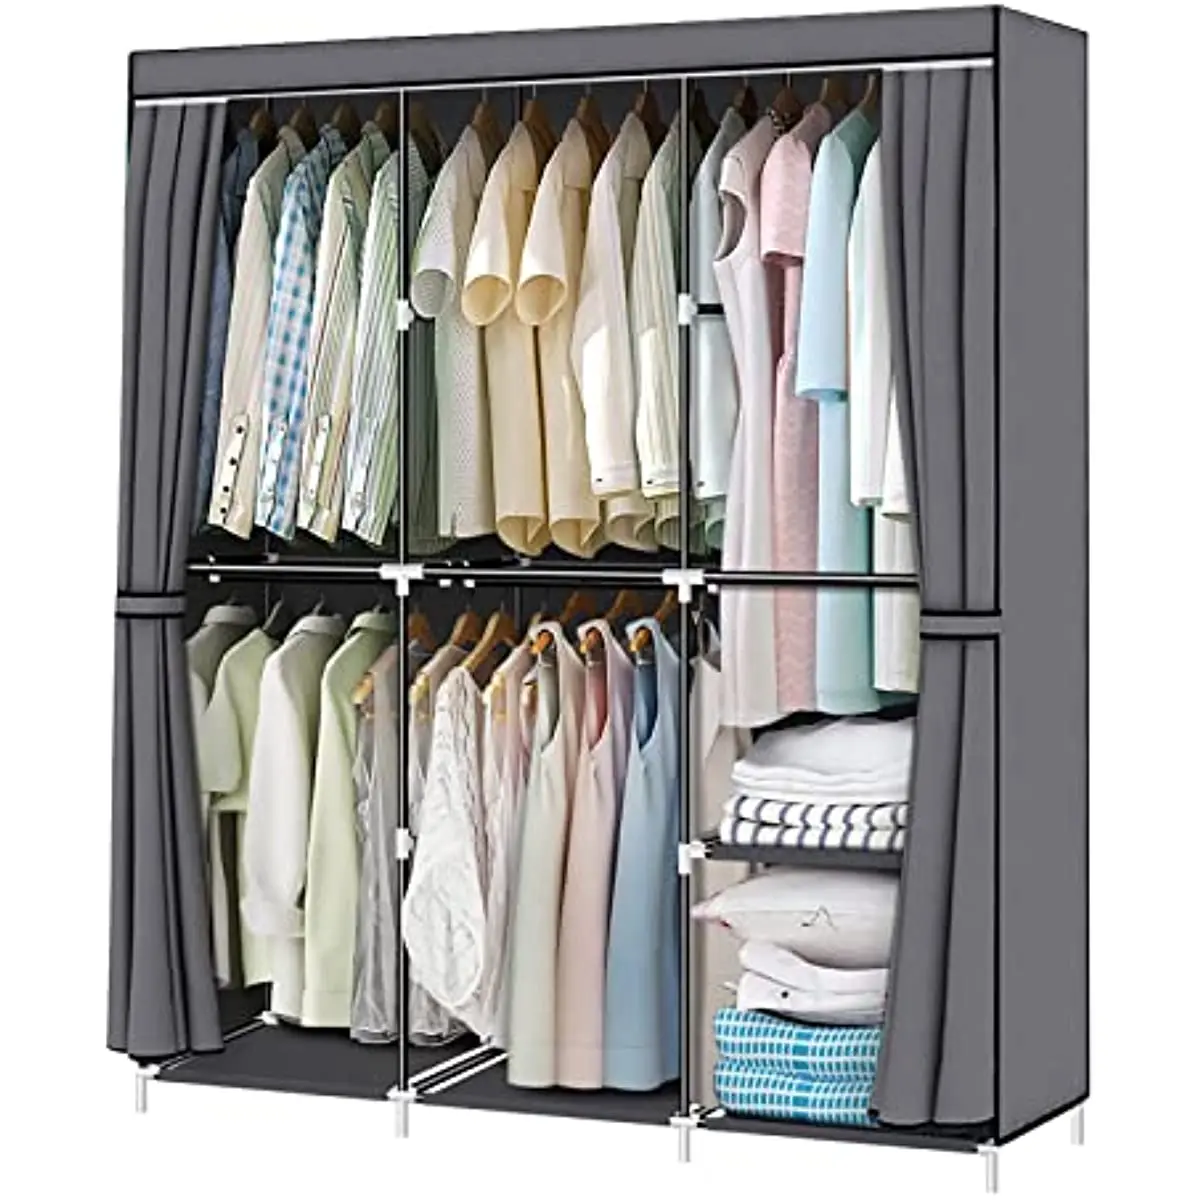 

YOUUD 50 Inch Wardrobe Closet for Hanging Clothes with Non-Woven Fabric Cover and Hanging Rods, Quick and Easy Assembly